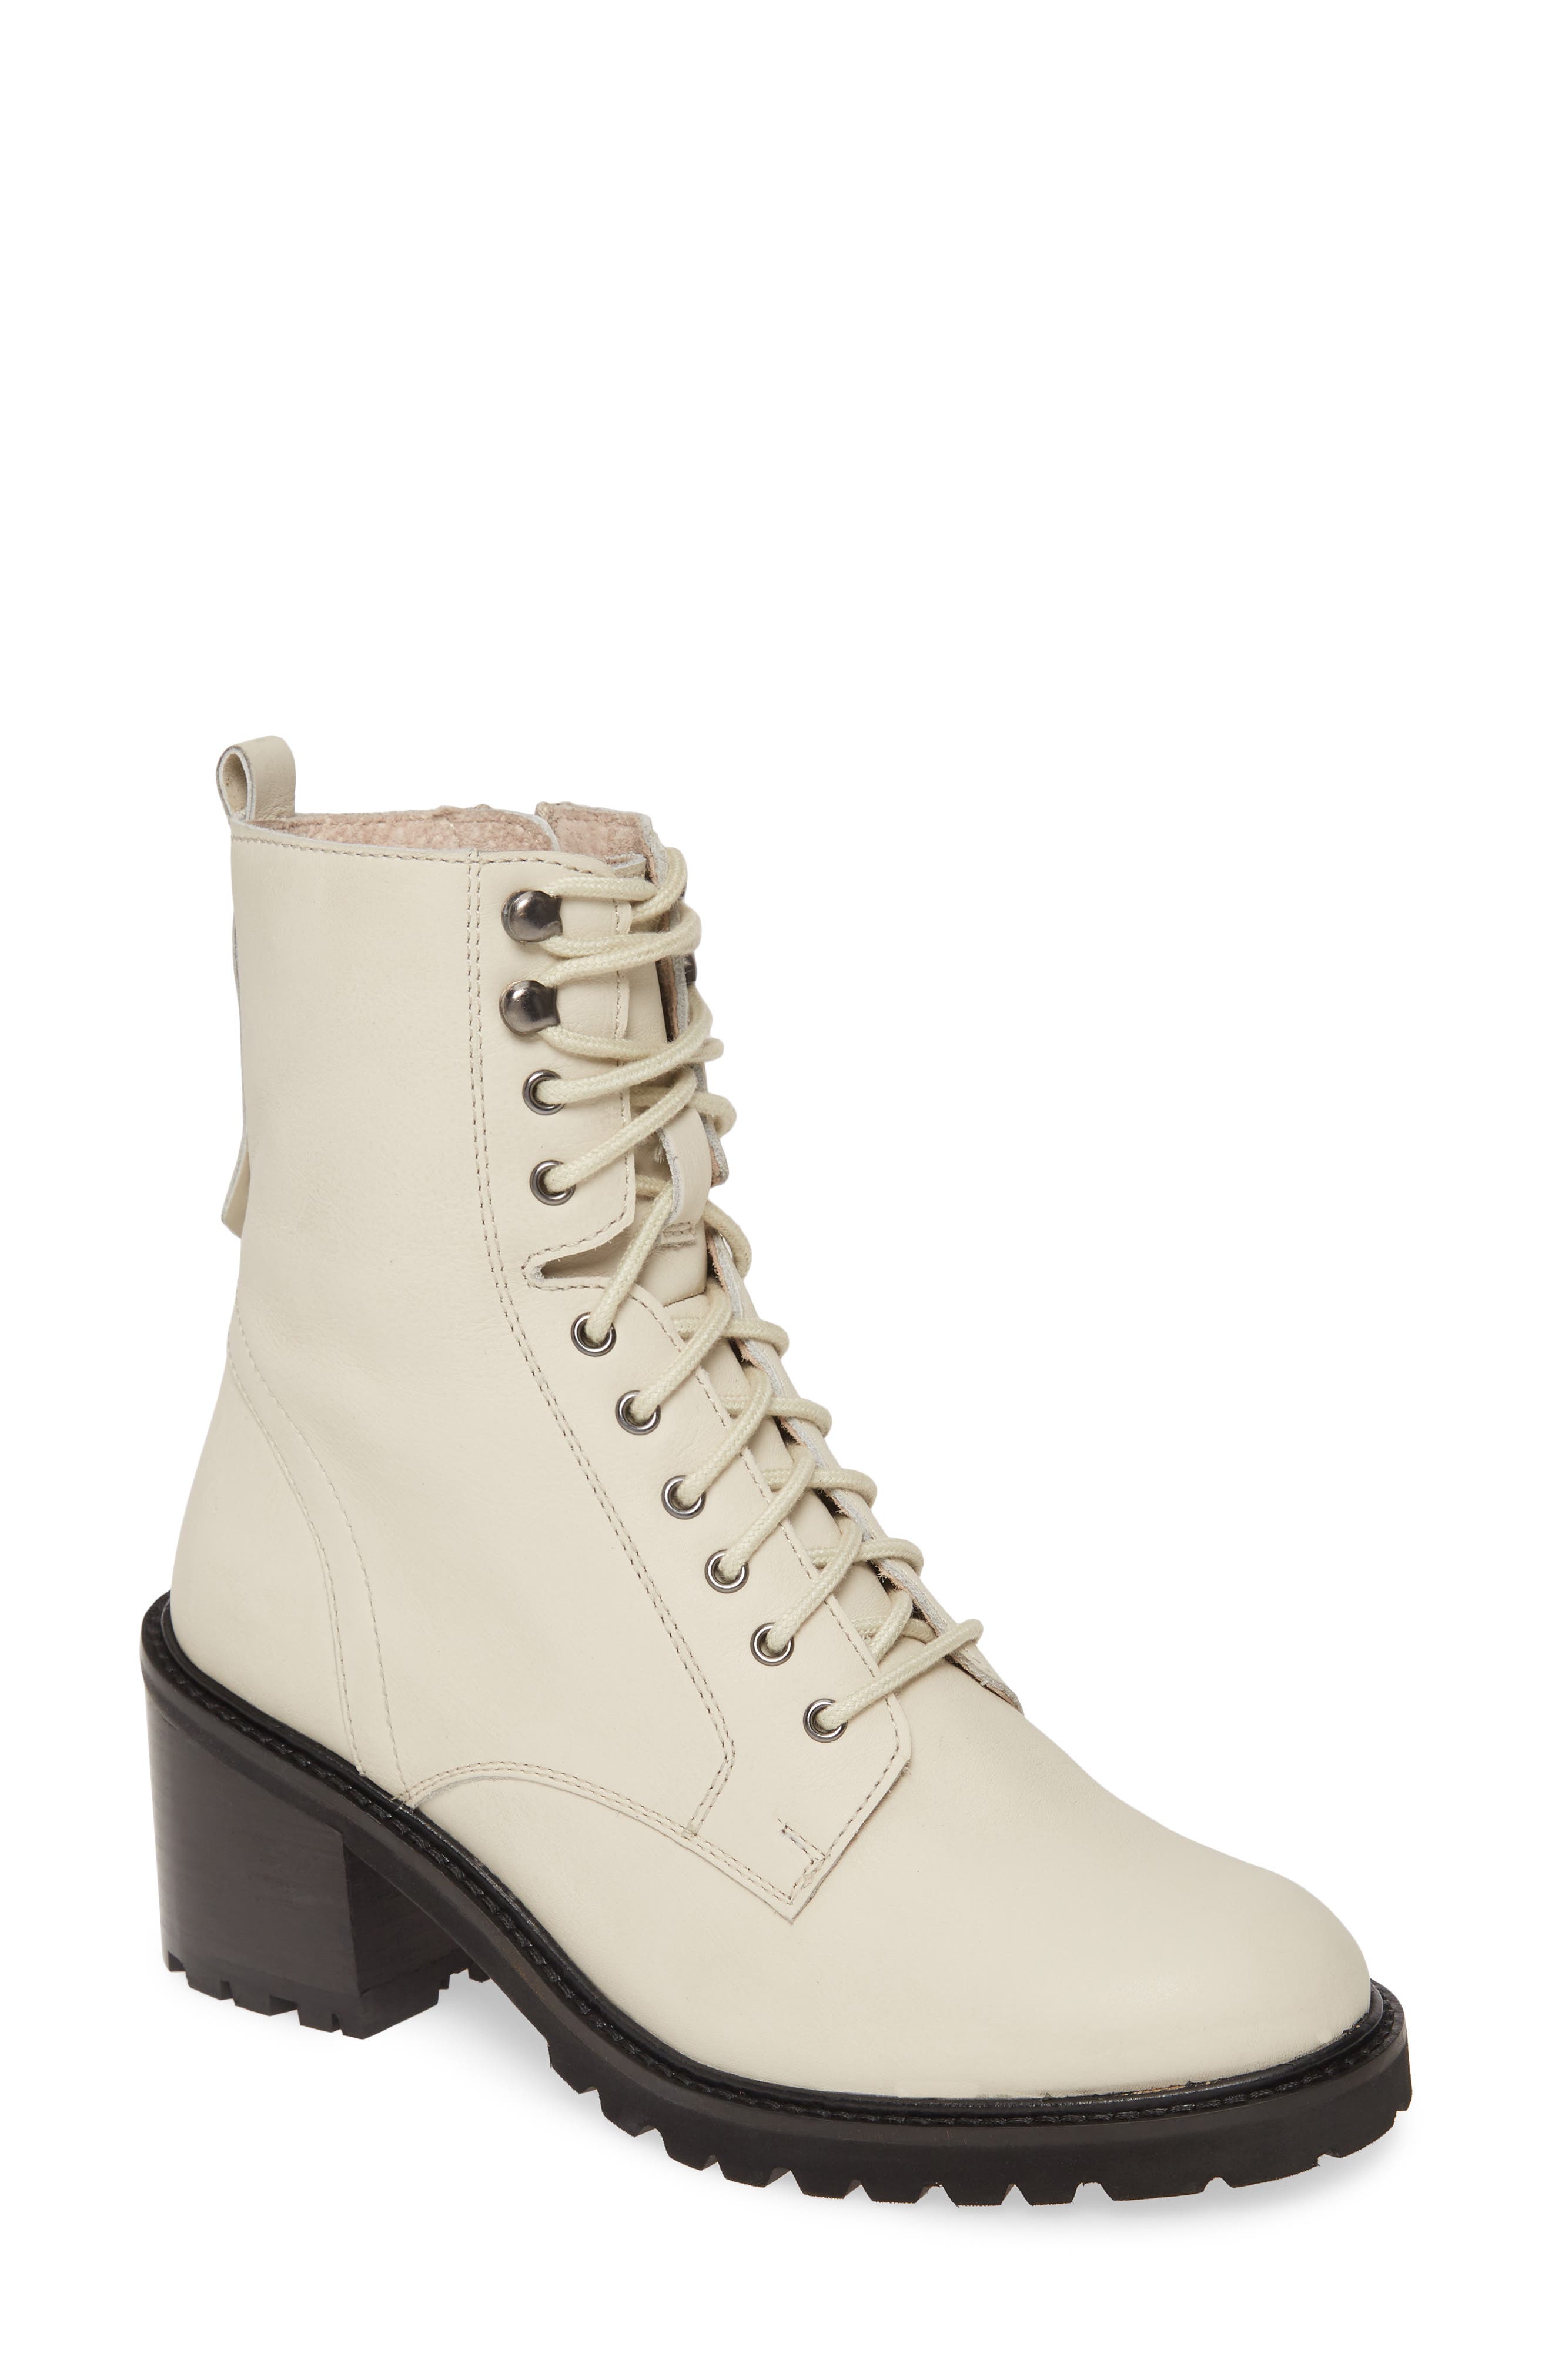 off white combat boots